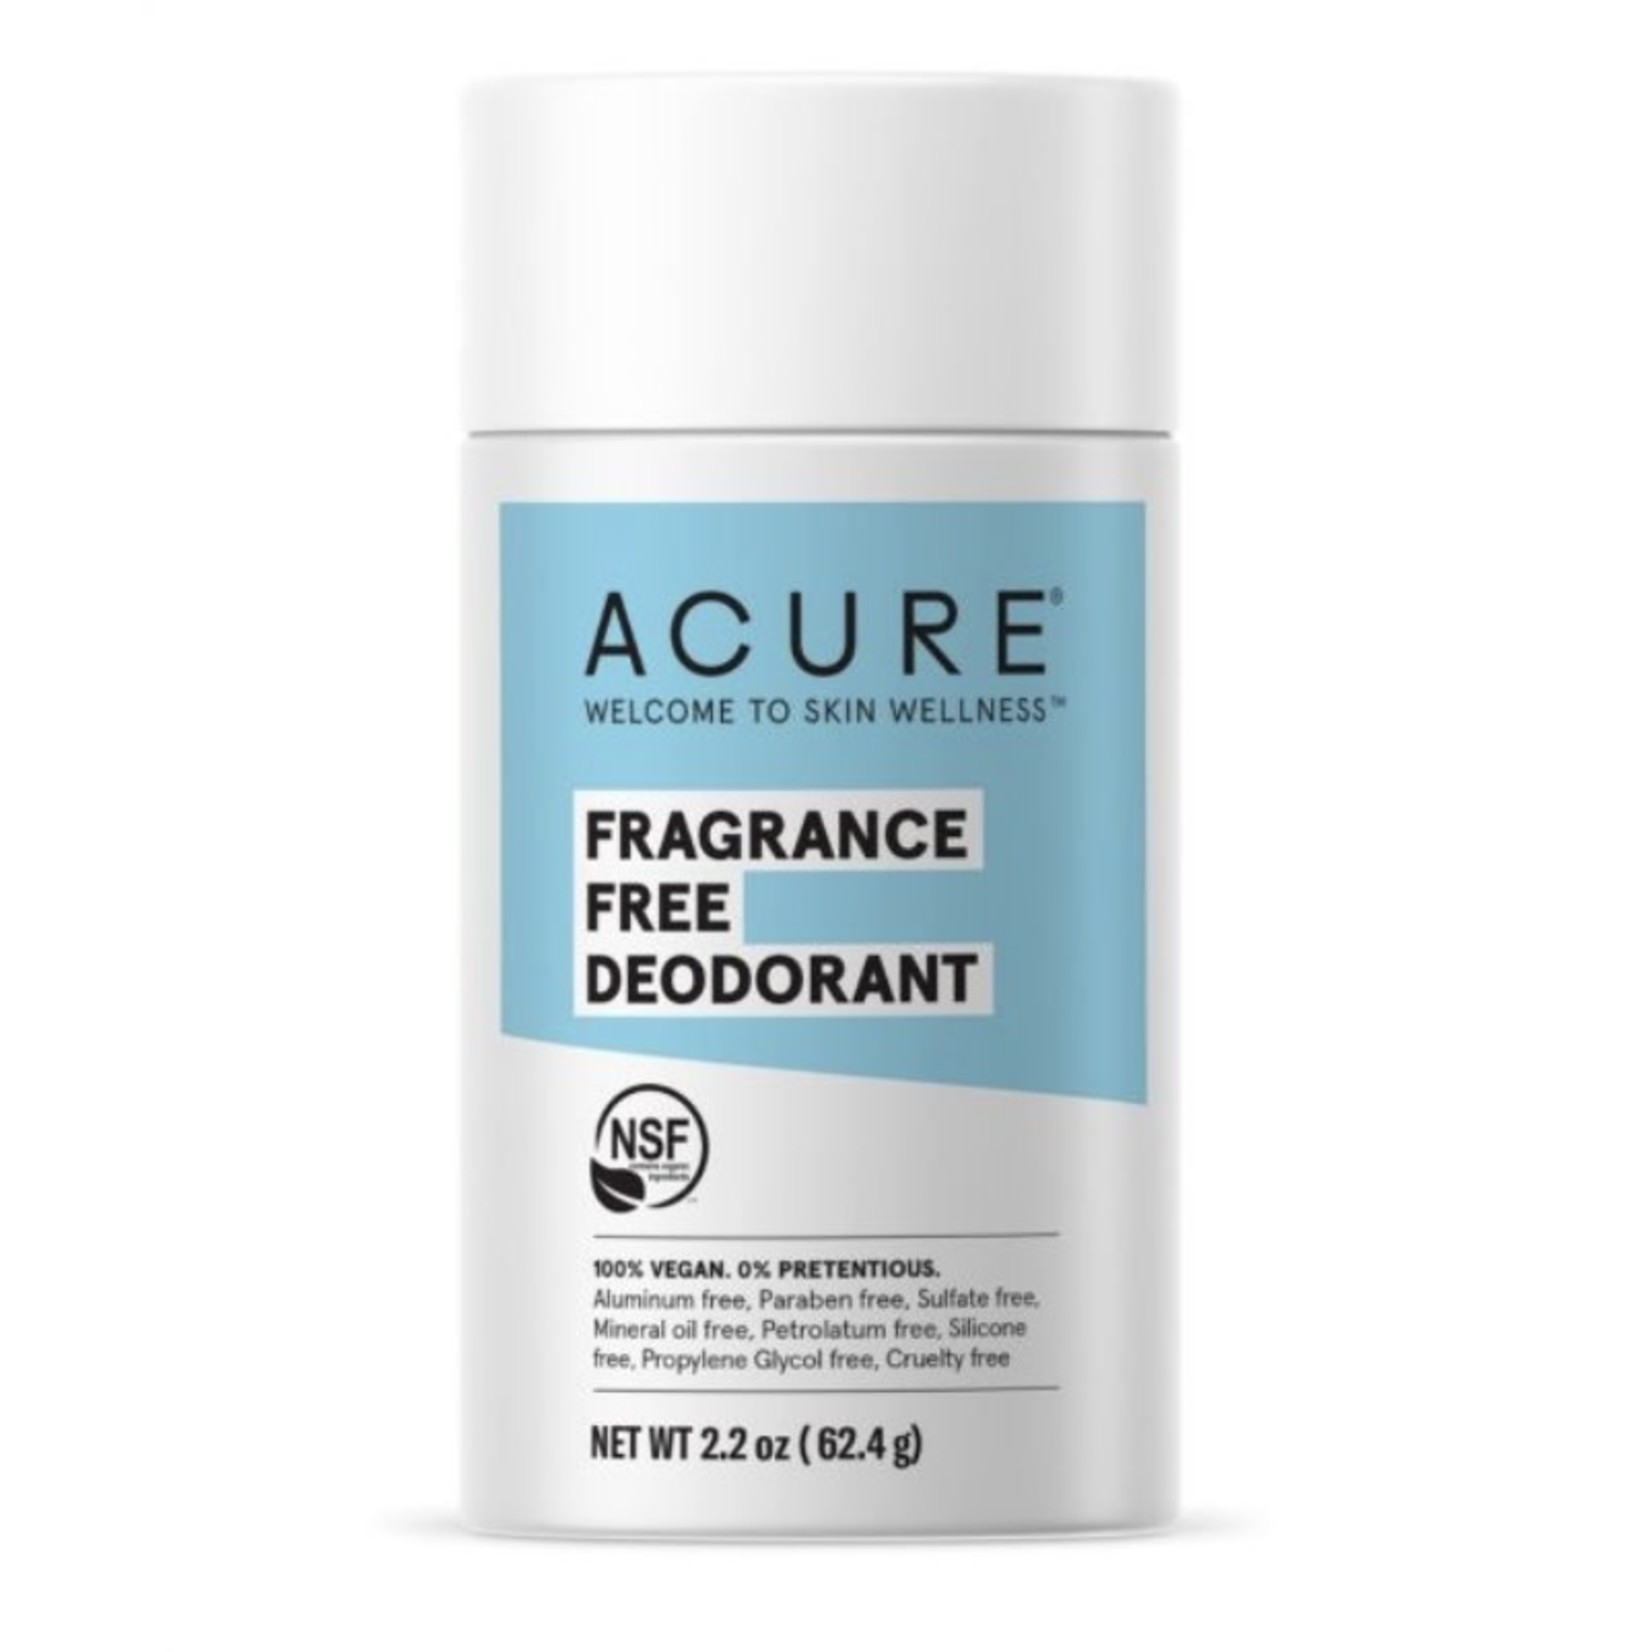 Acure Acure Fragrance Free Deodorant